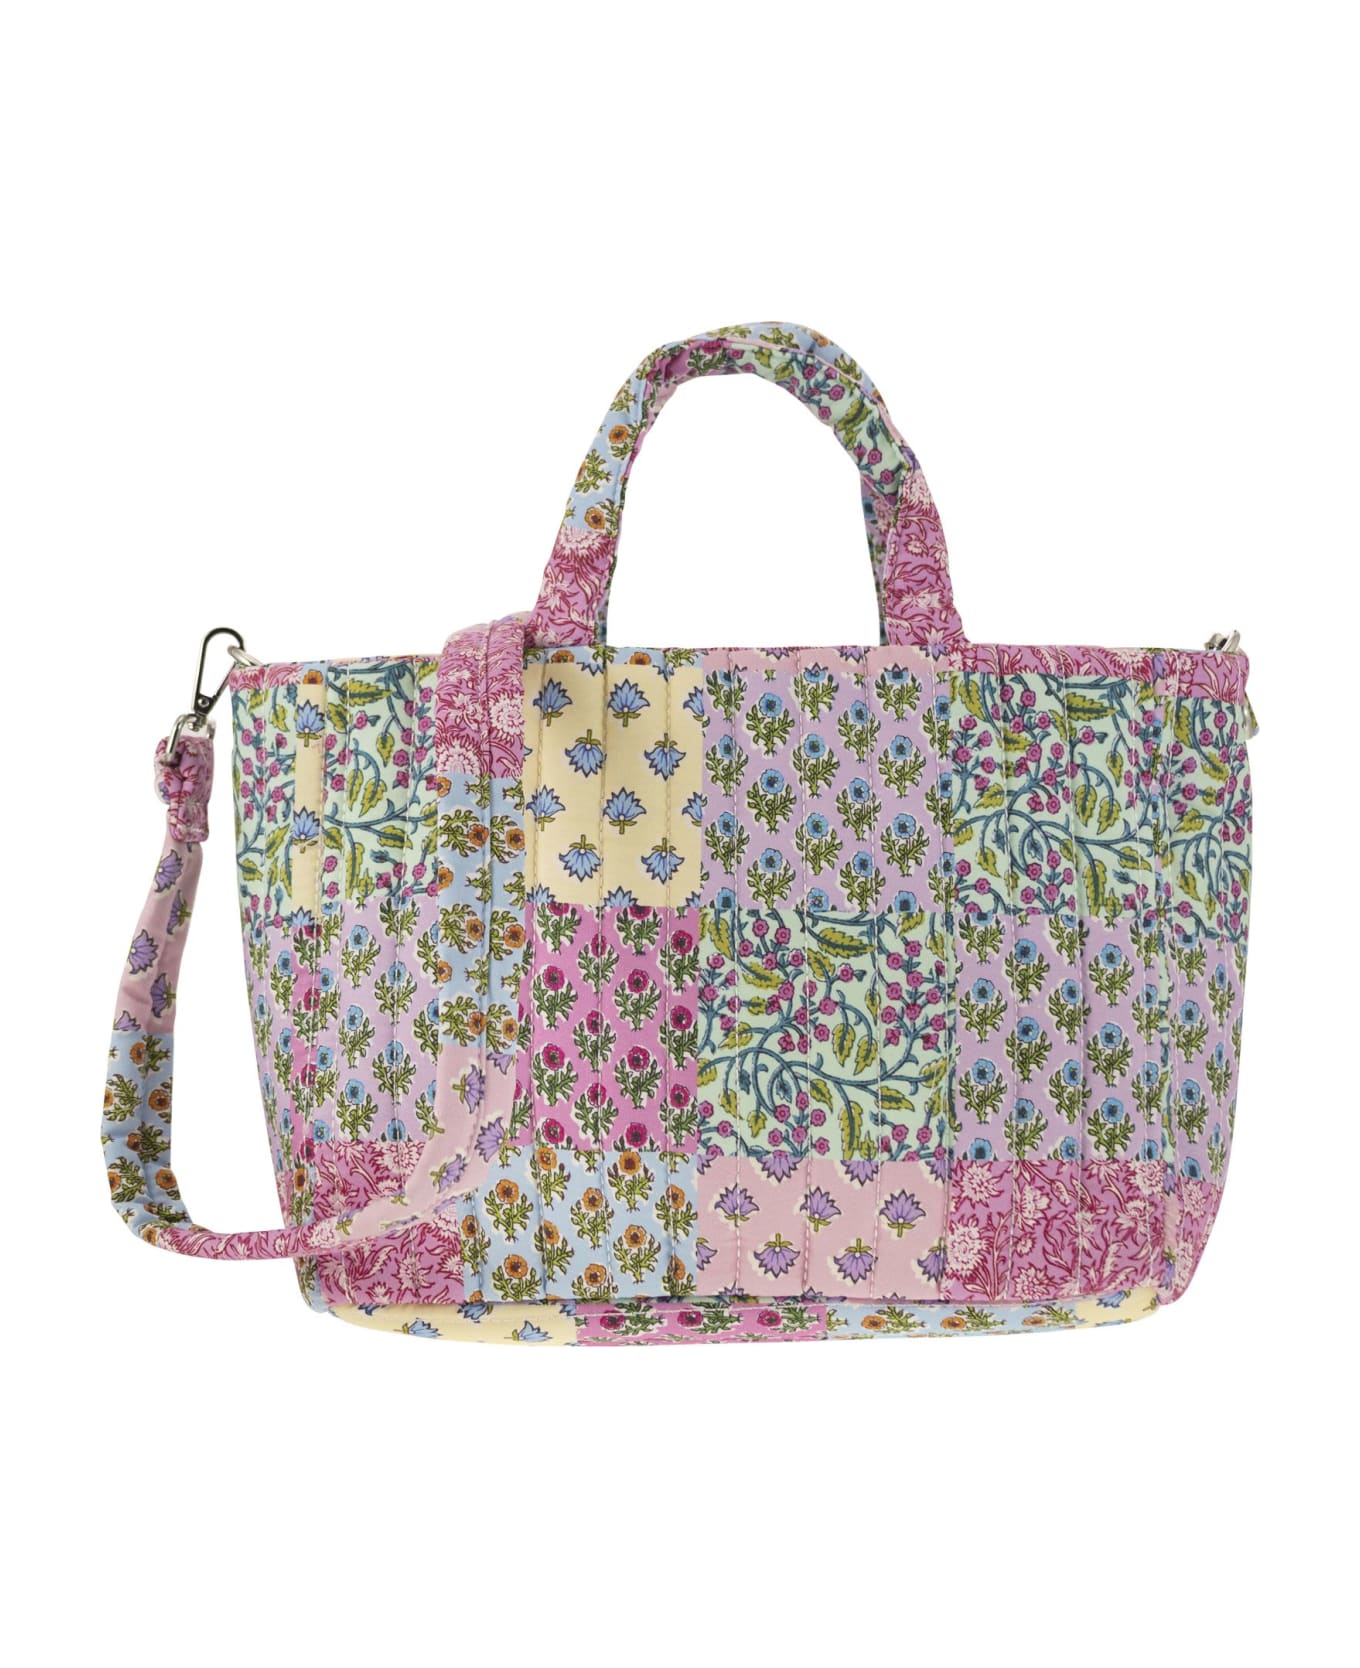 MC2 Saint Barth Soft Tote Mid Quilted Bag With Flowers - Multicolor トートバッグ